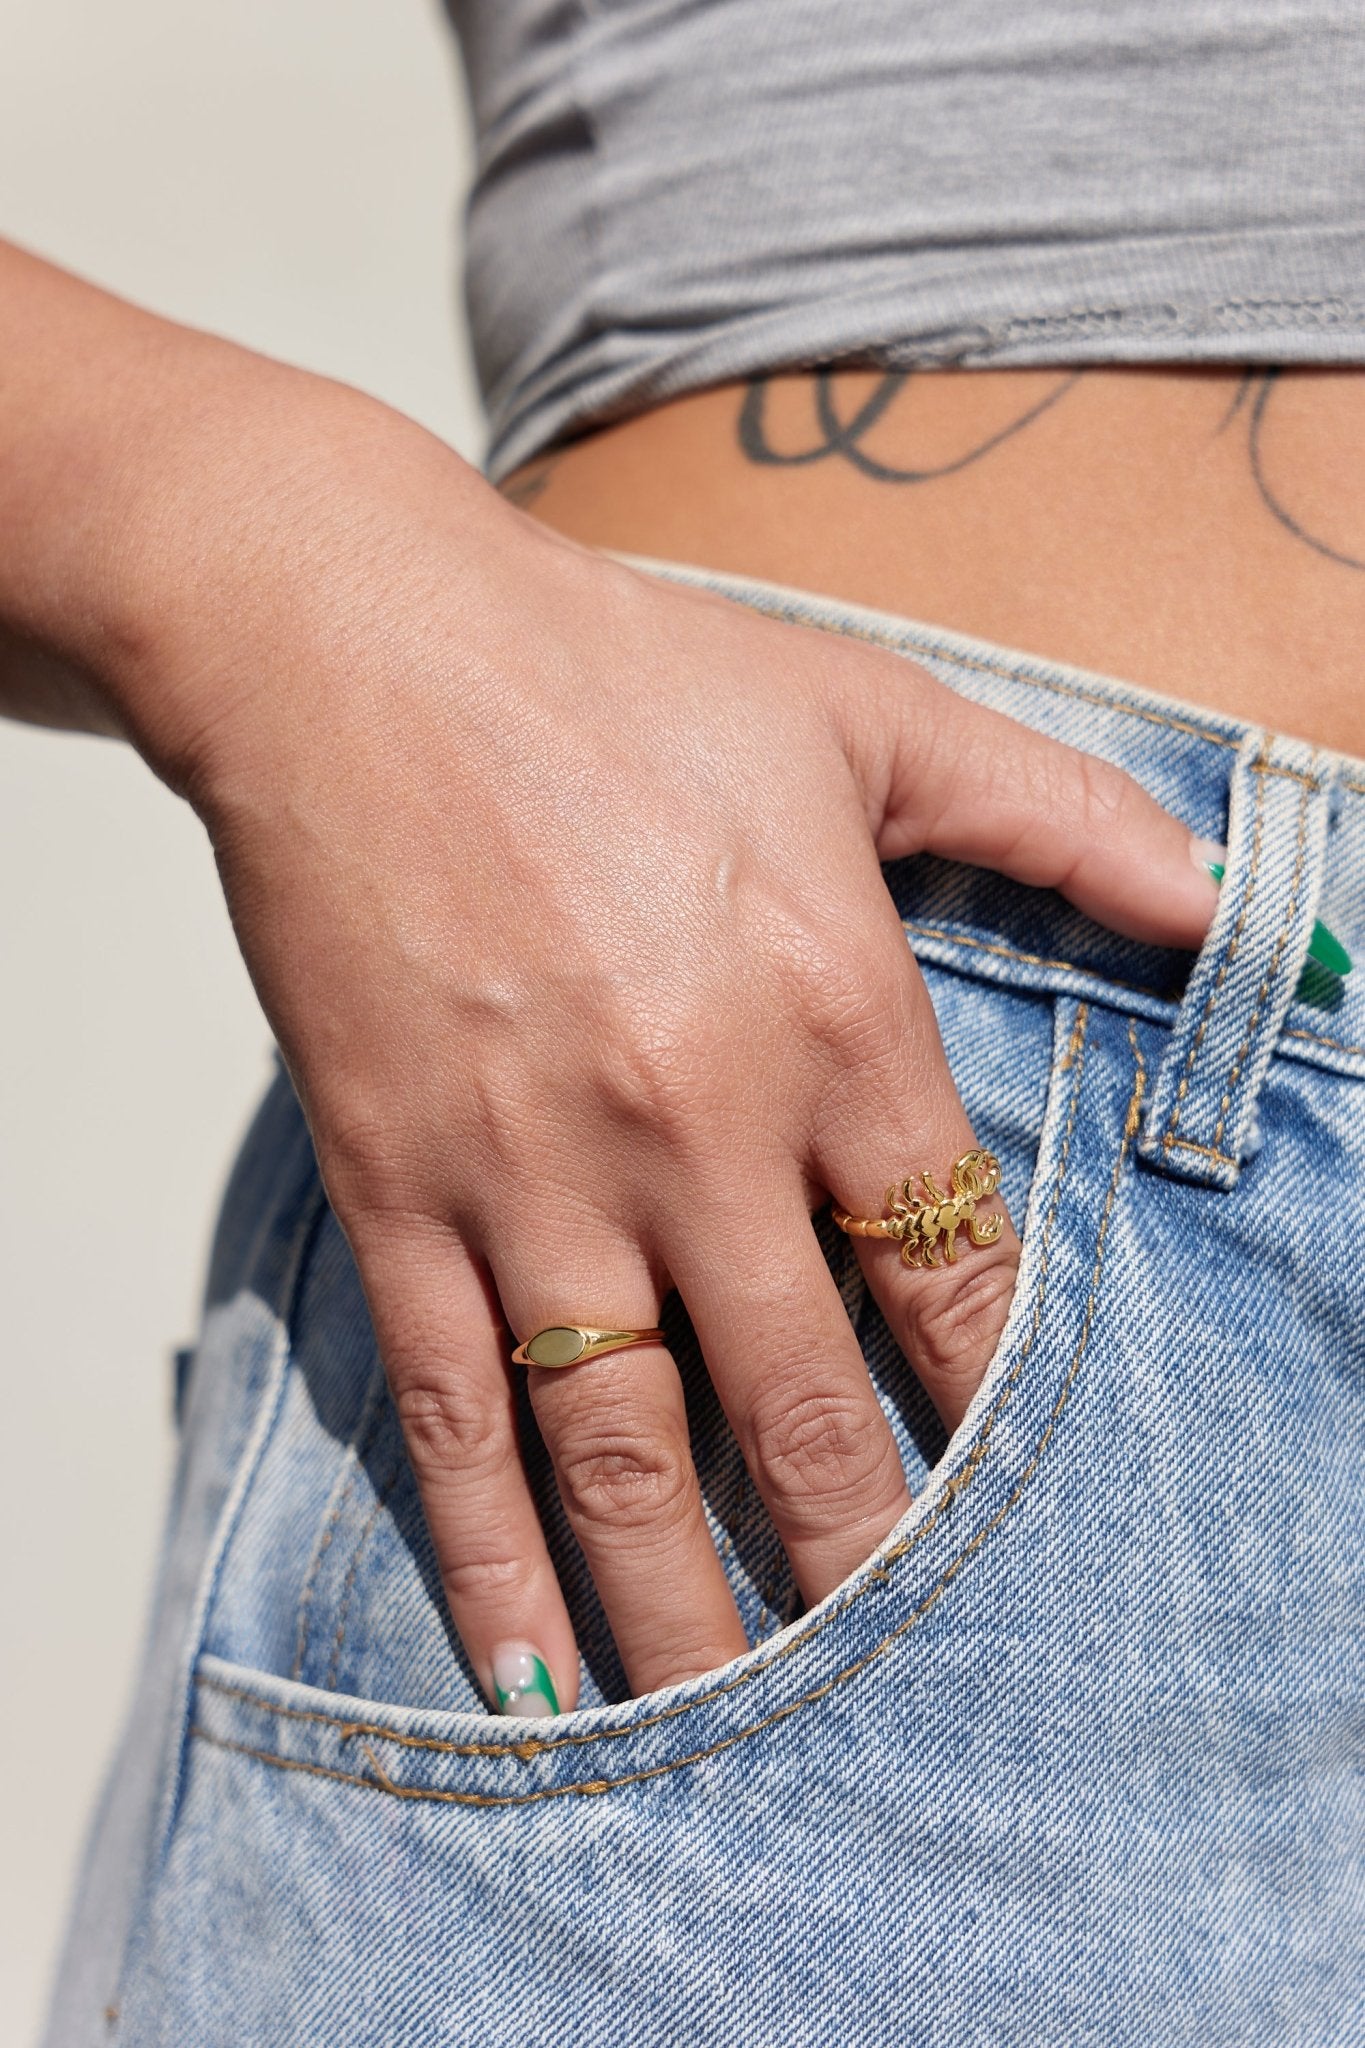 Kylie Gold Ring - Flaire & Co.